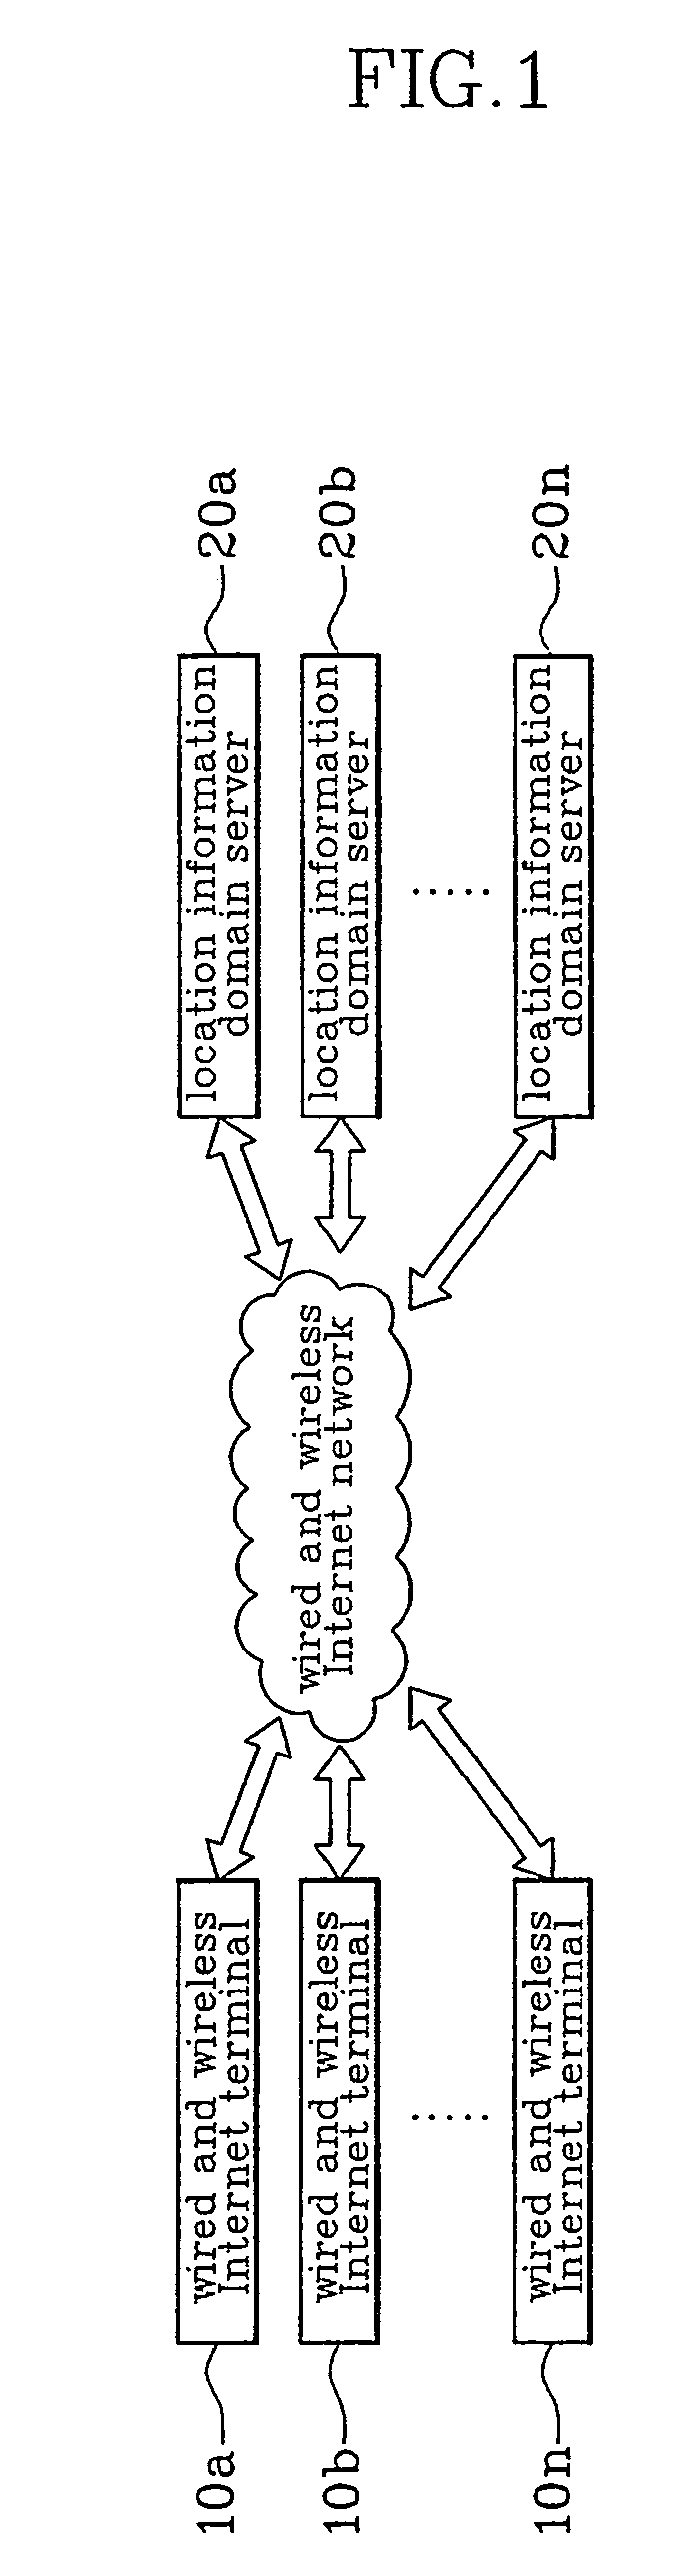 Location information sharing method based on wired and wireless internet using location id